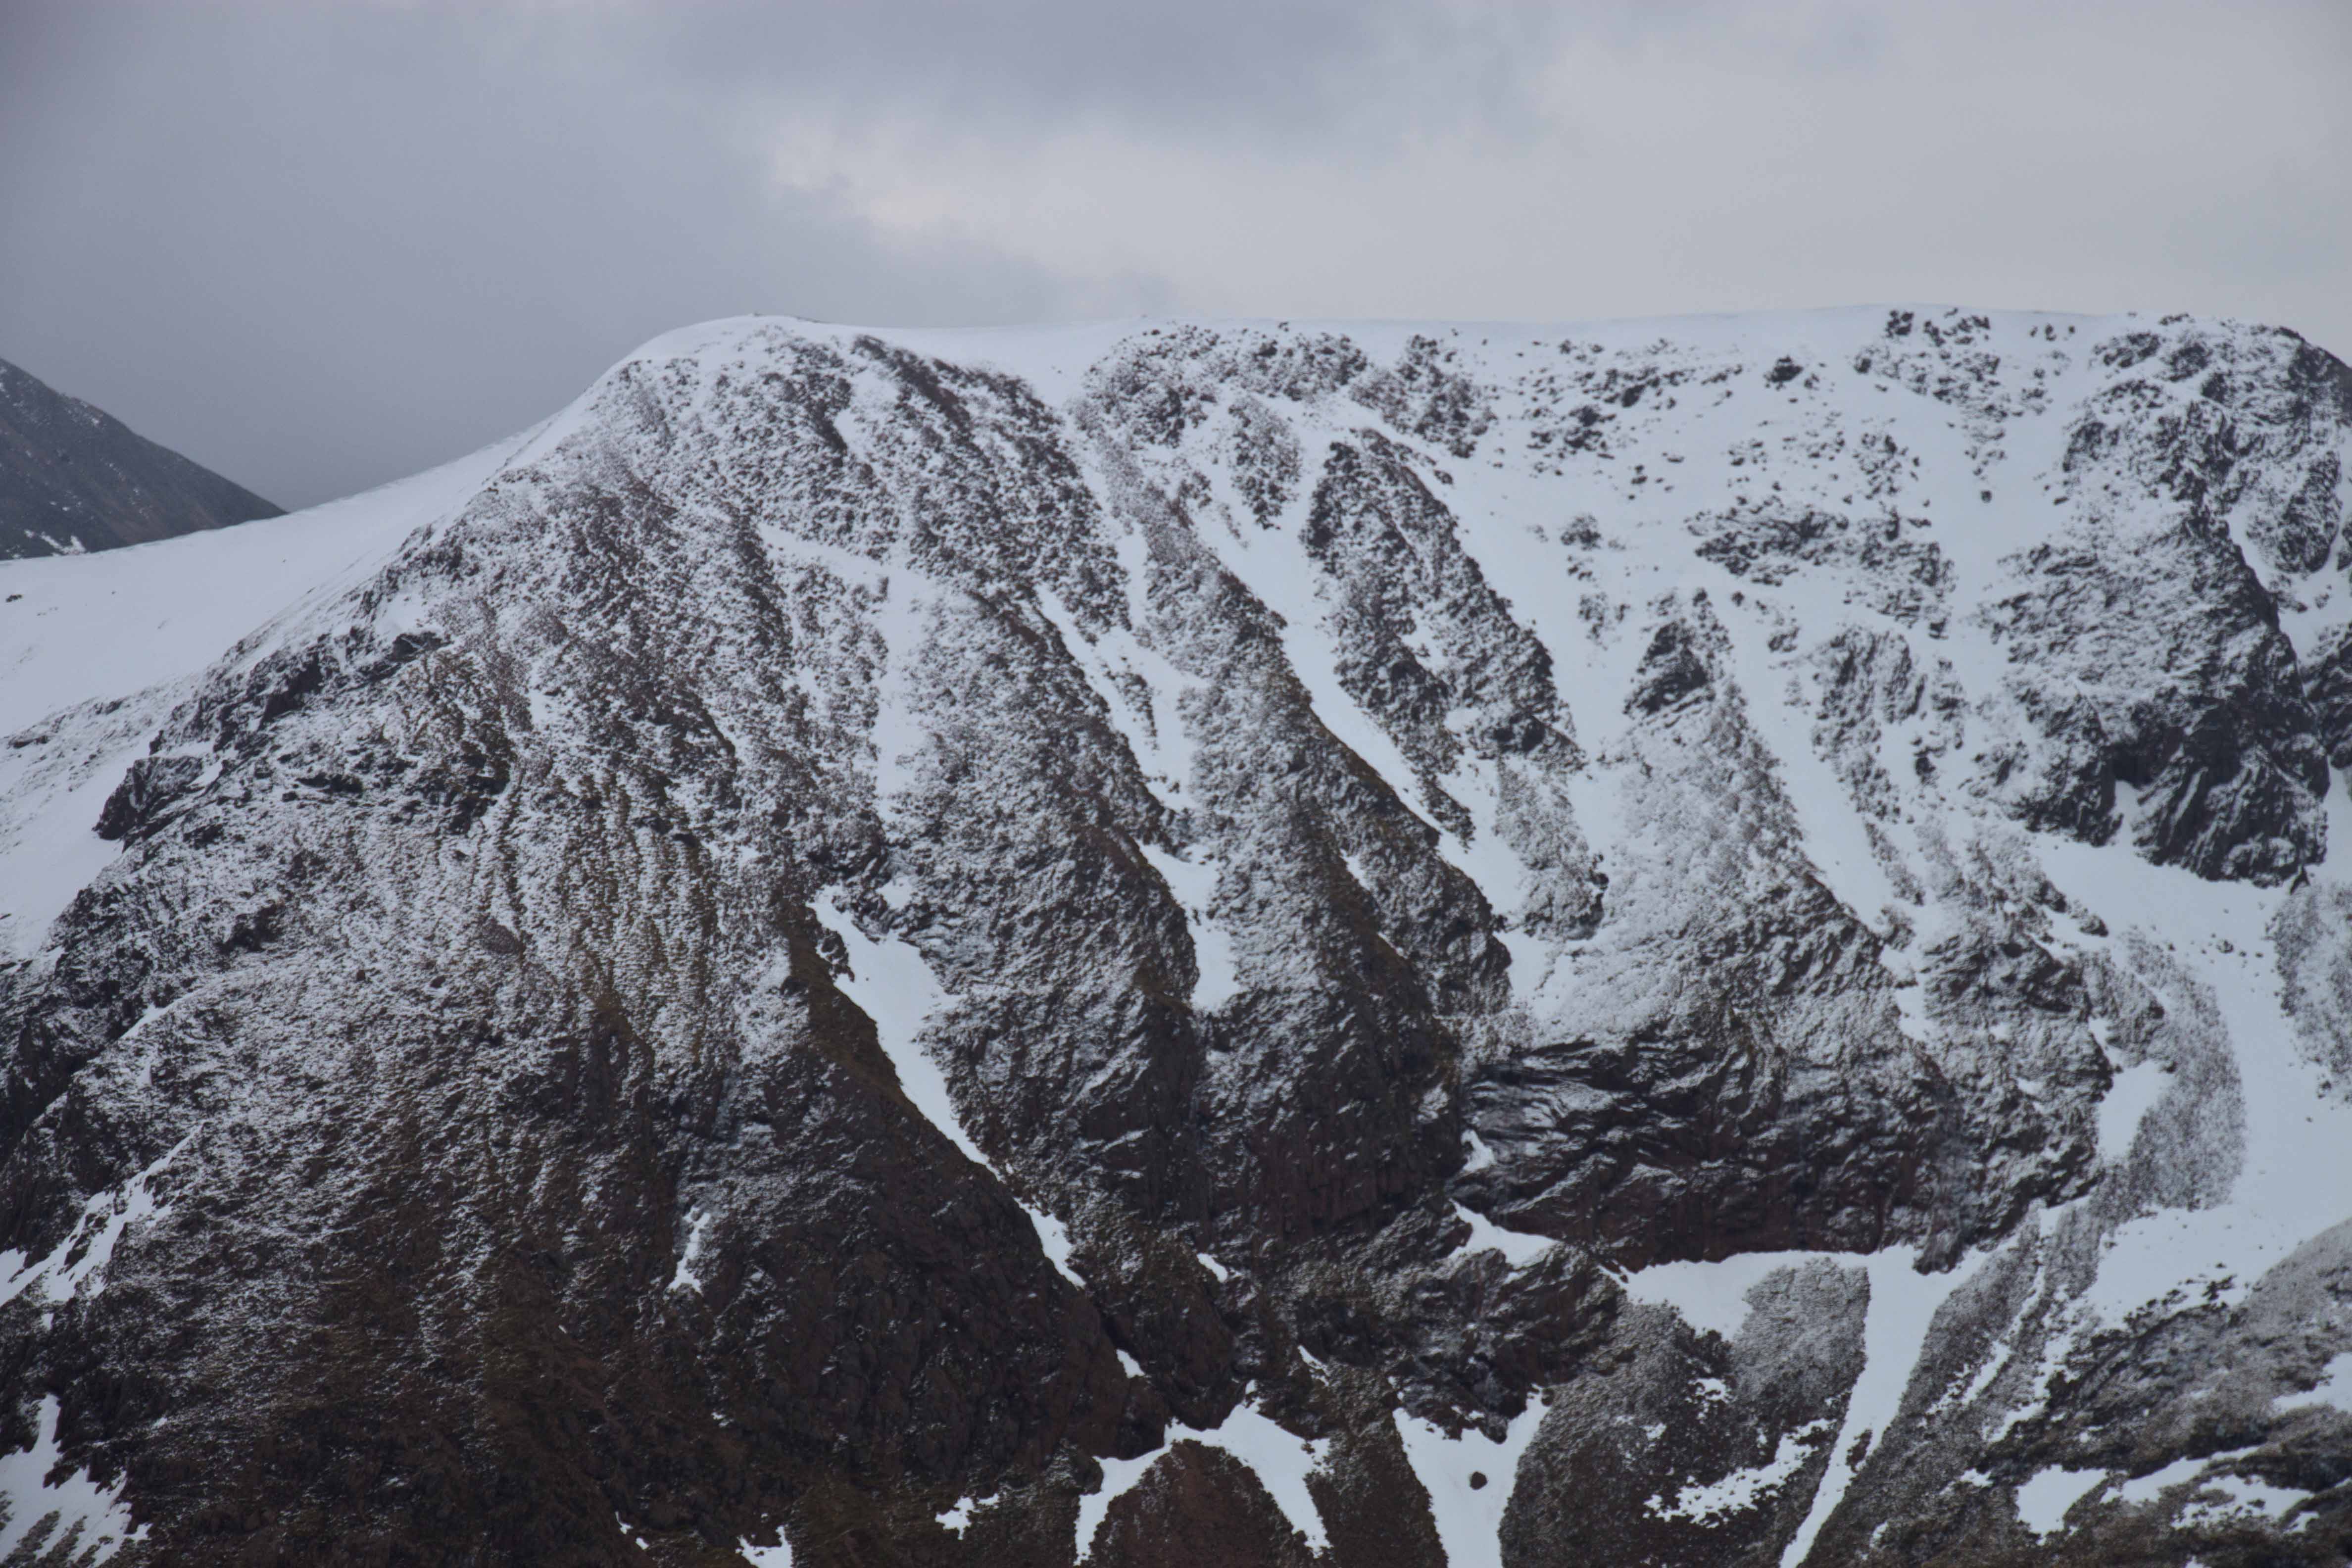 Ridge between Stob Ban and Mullach nan Coirean in the Mamores south of Glen Nevis. March 2015.